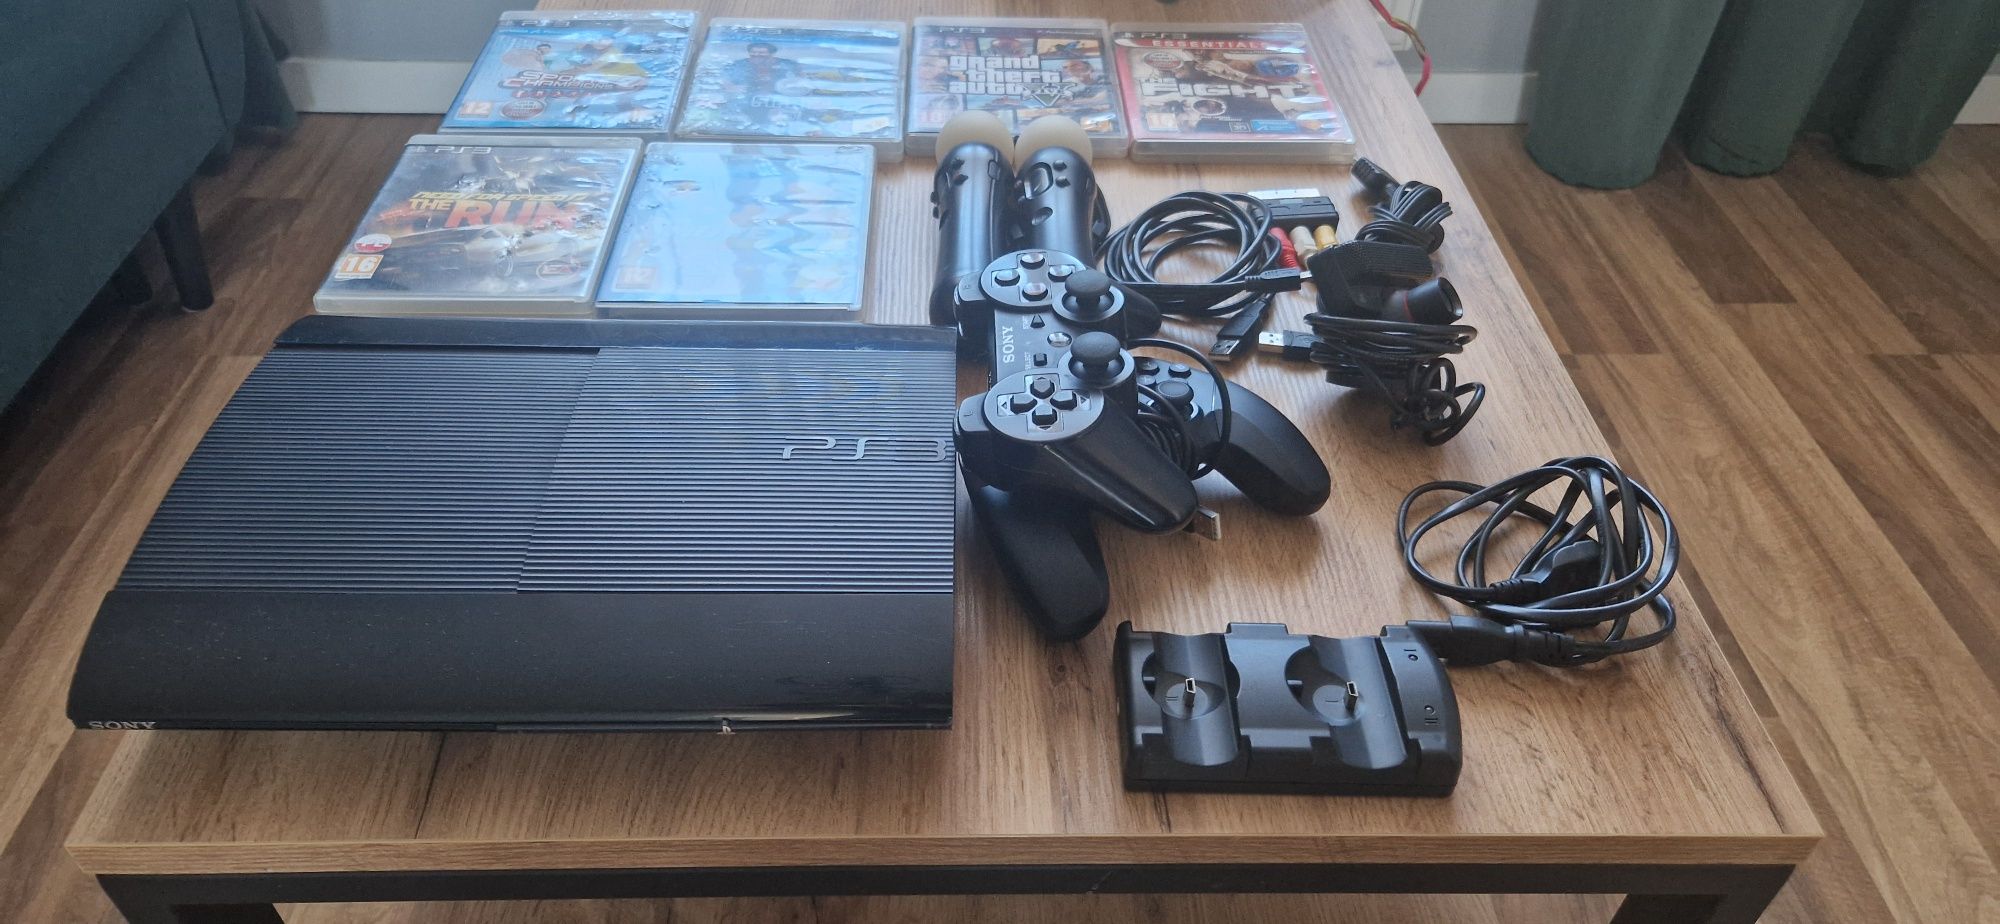 Play station 3 ps3 500gb